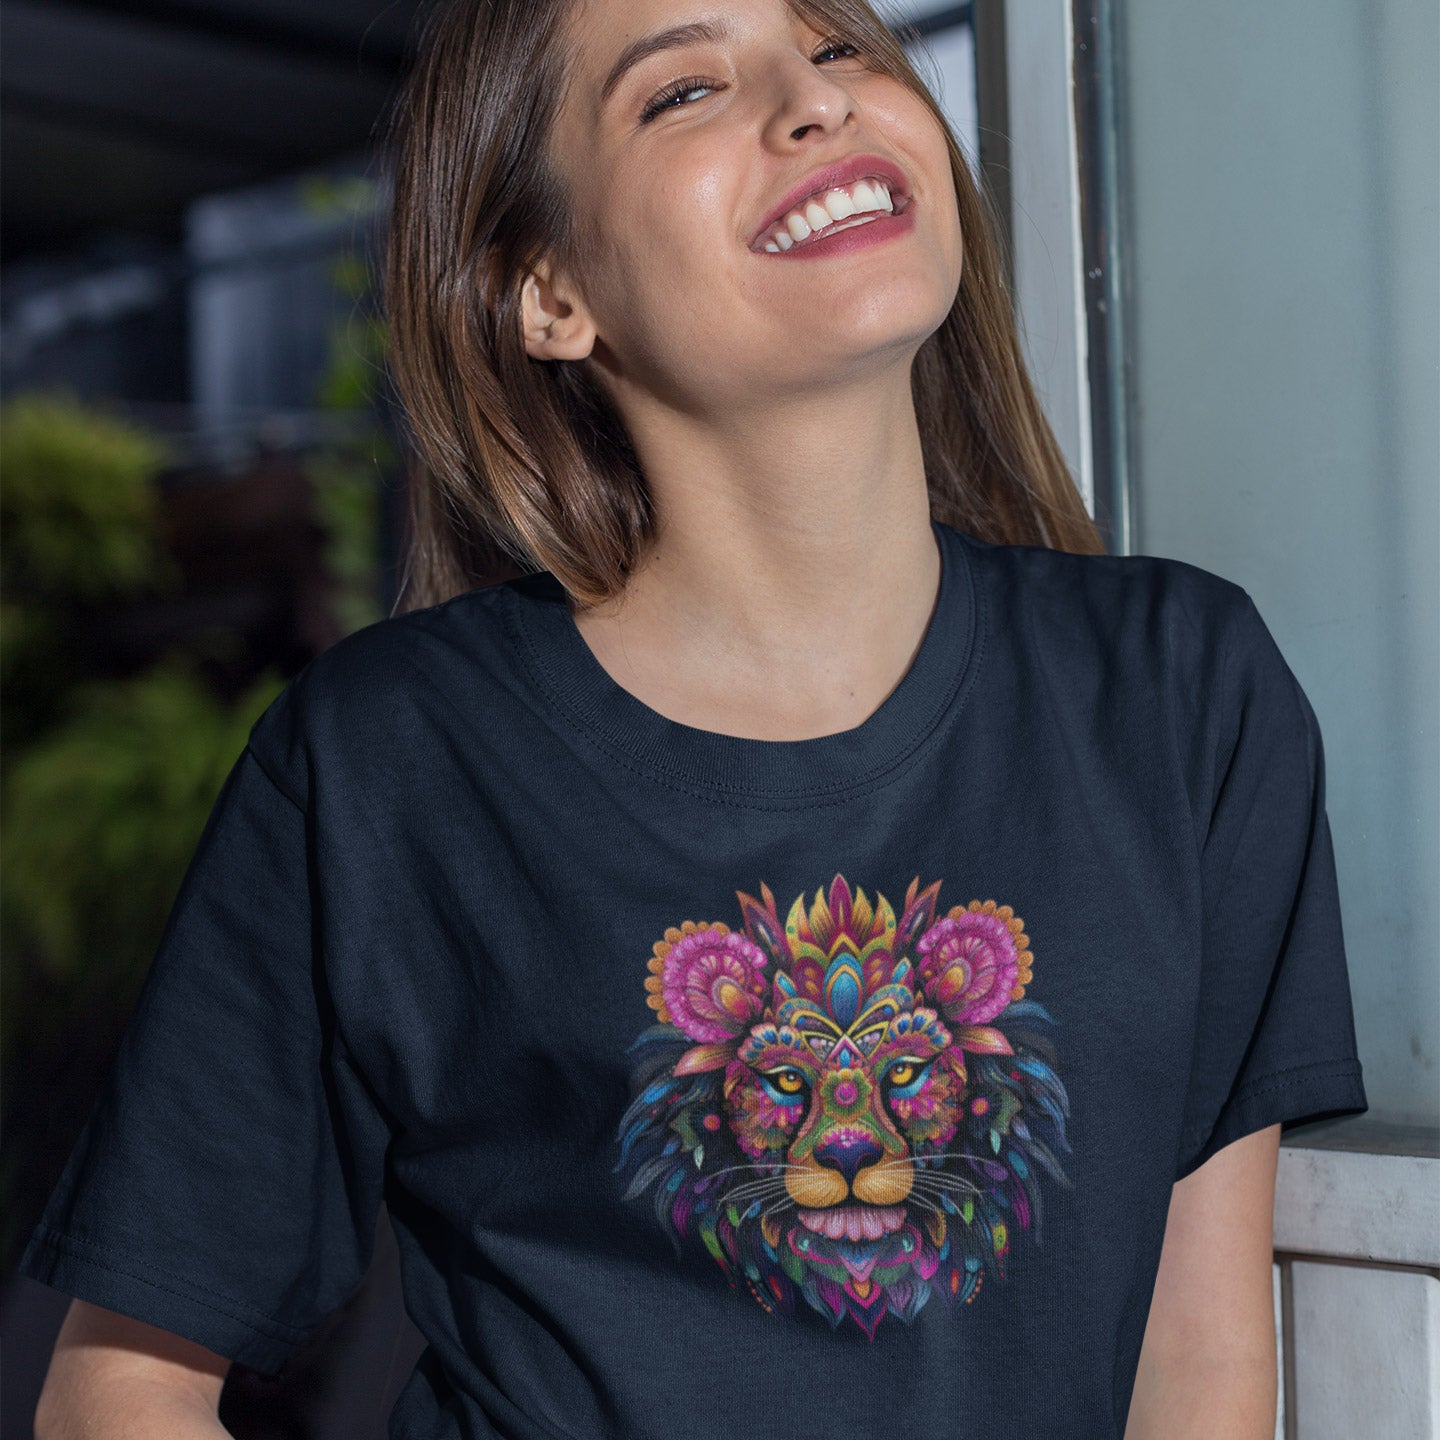 smiling woman wearing a navy blue t-shirt with a colorful floral lion print